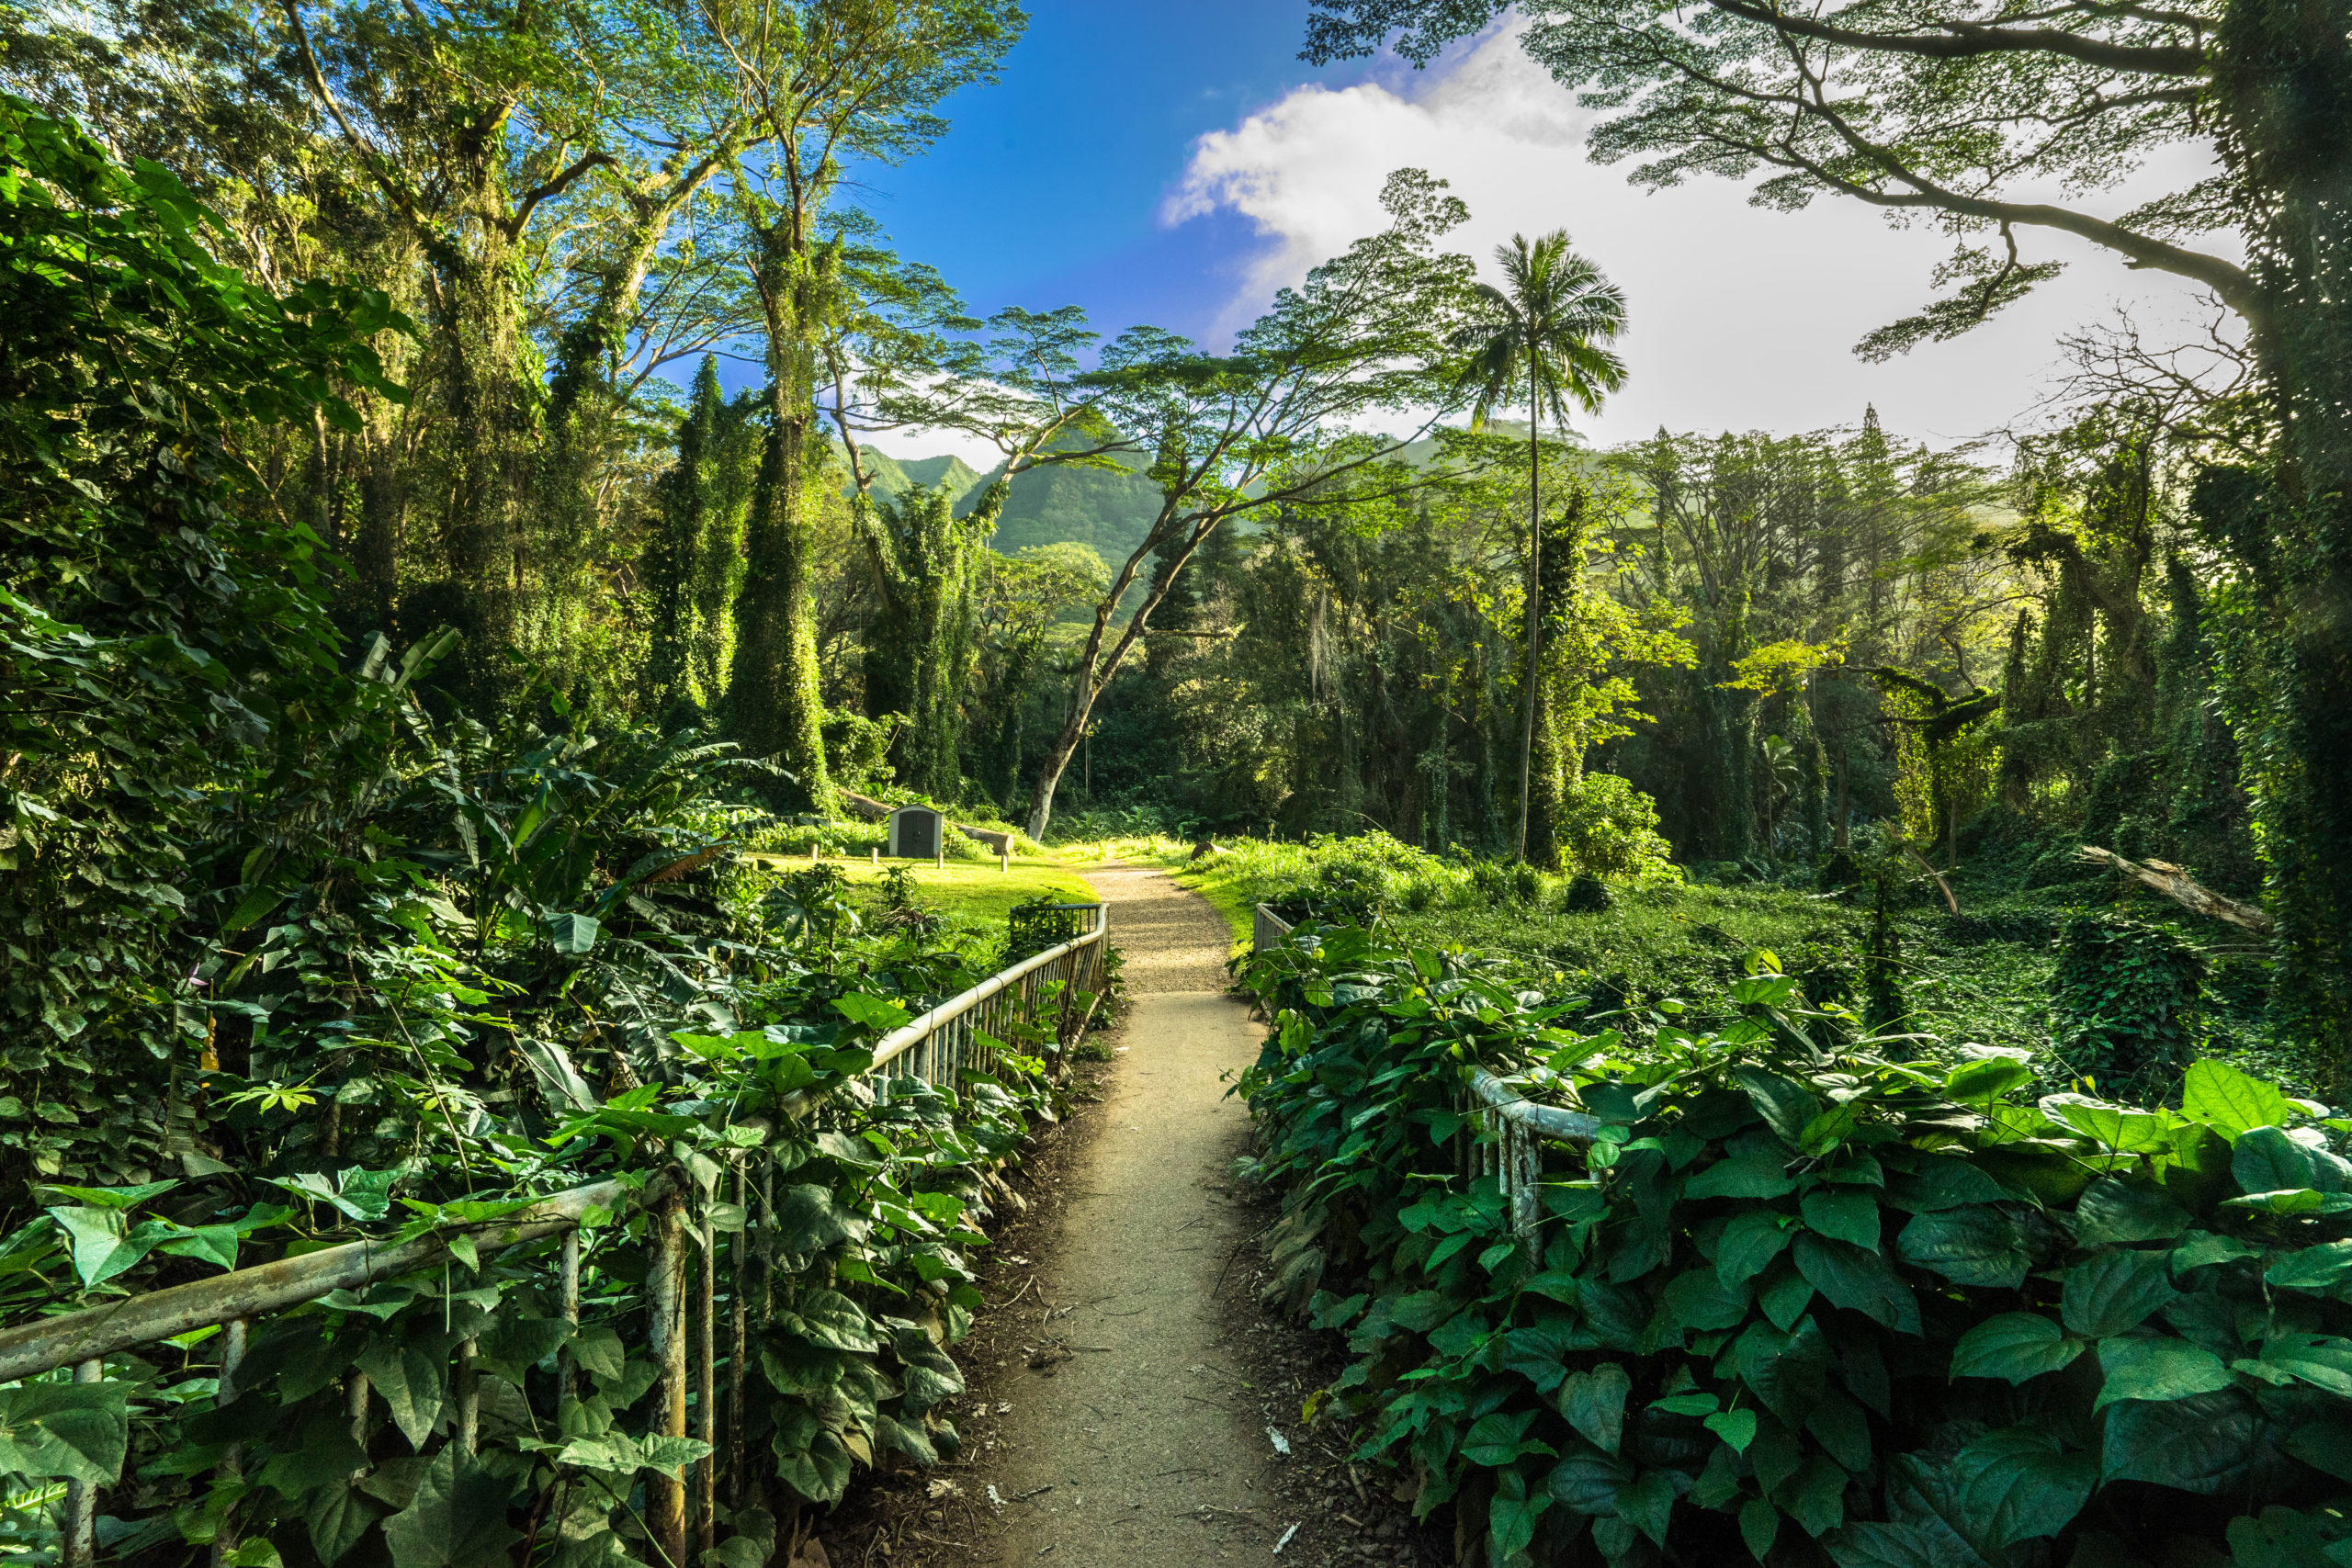 14 BEST EASY HIKES ON OAHU WITH GREAT VIEWS